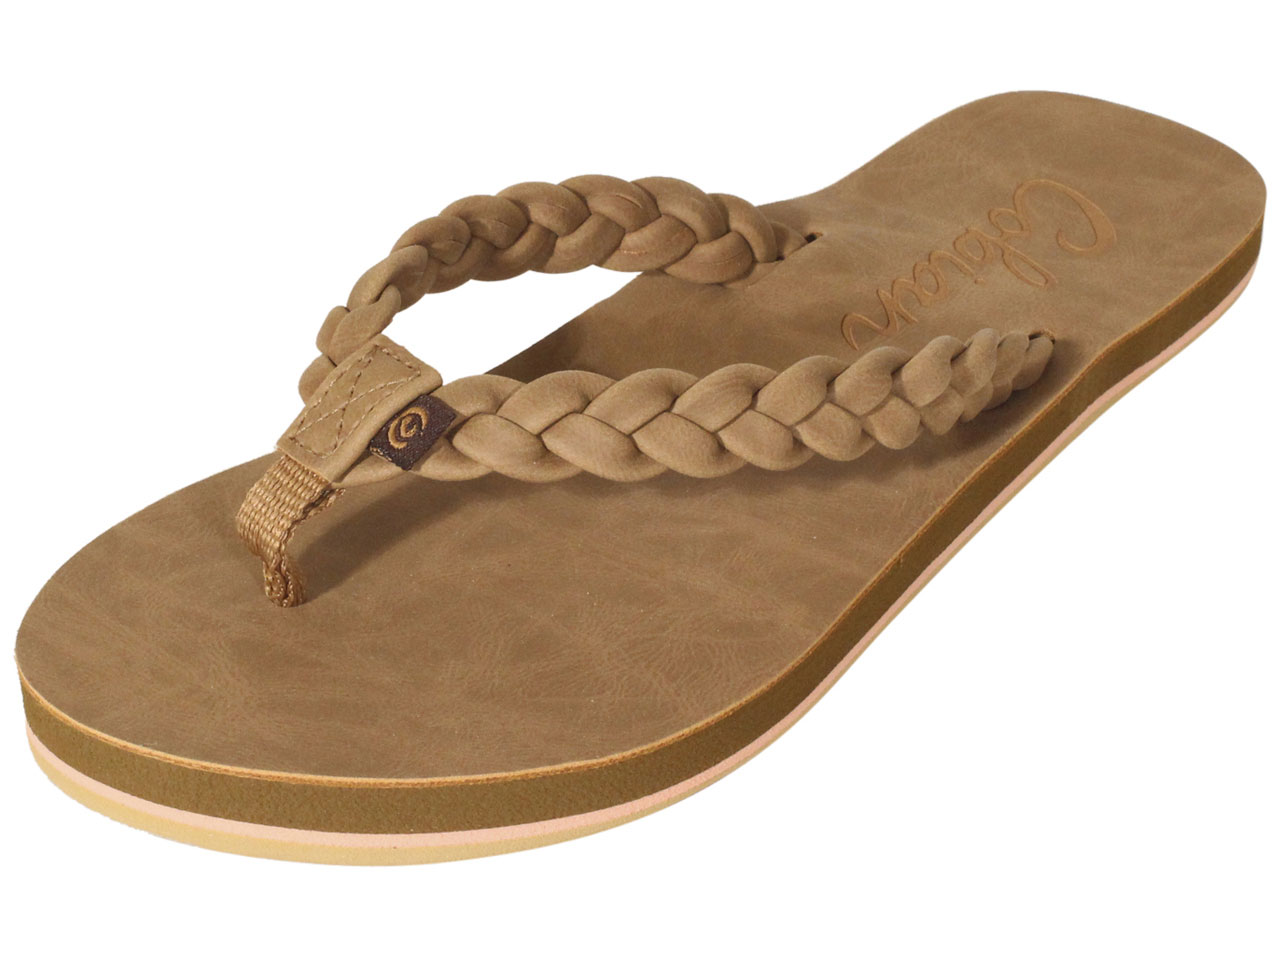 UPC 840207165412 product image for Cobian Braided Pacifica Flip Flops Tan Women's Thongs Sandals Shoes Sz: 8 - Brow | upcitemdb.com